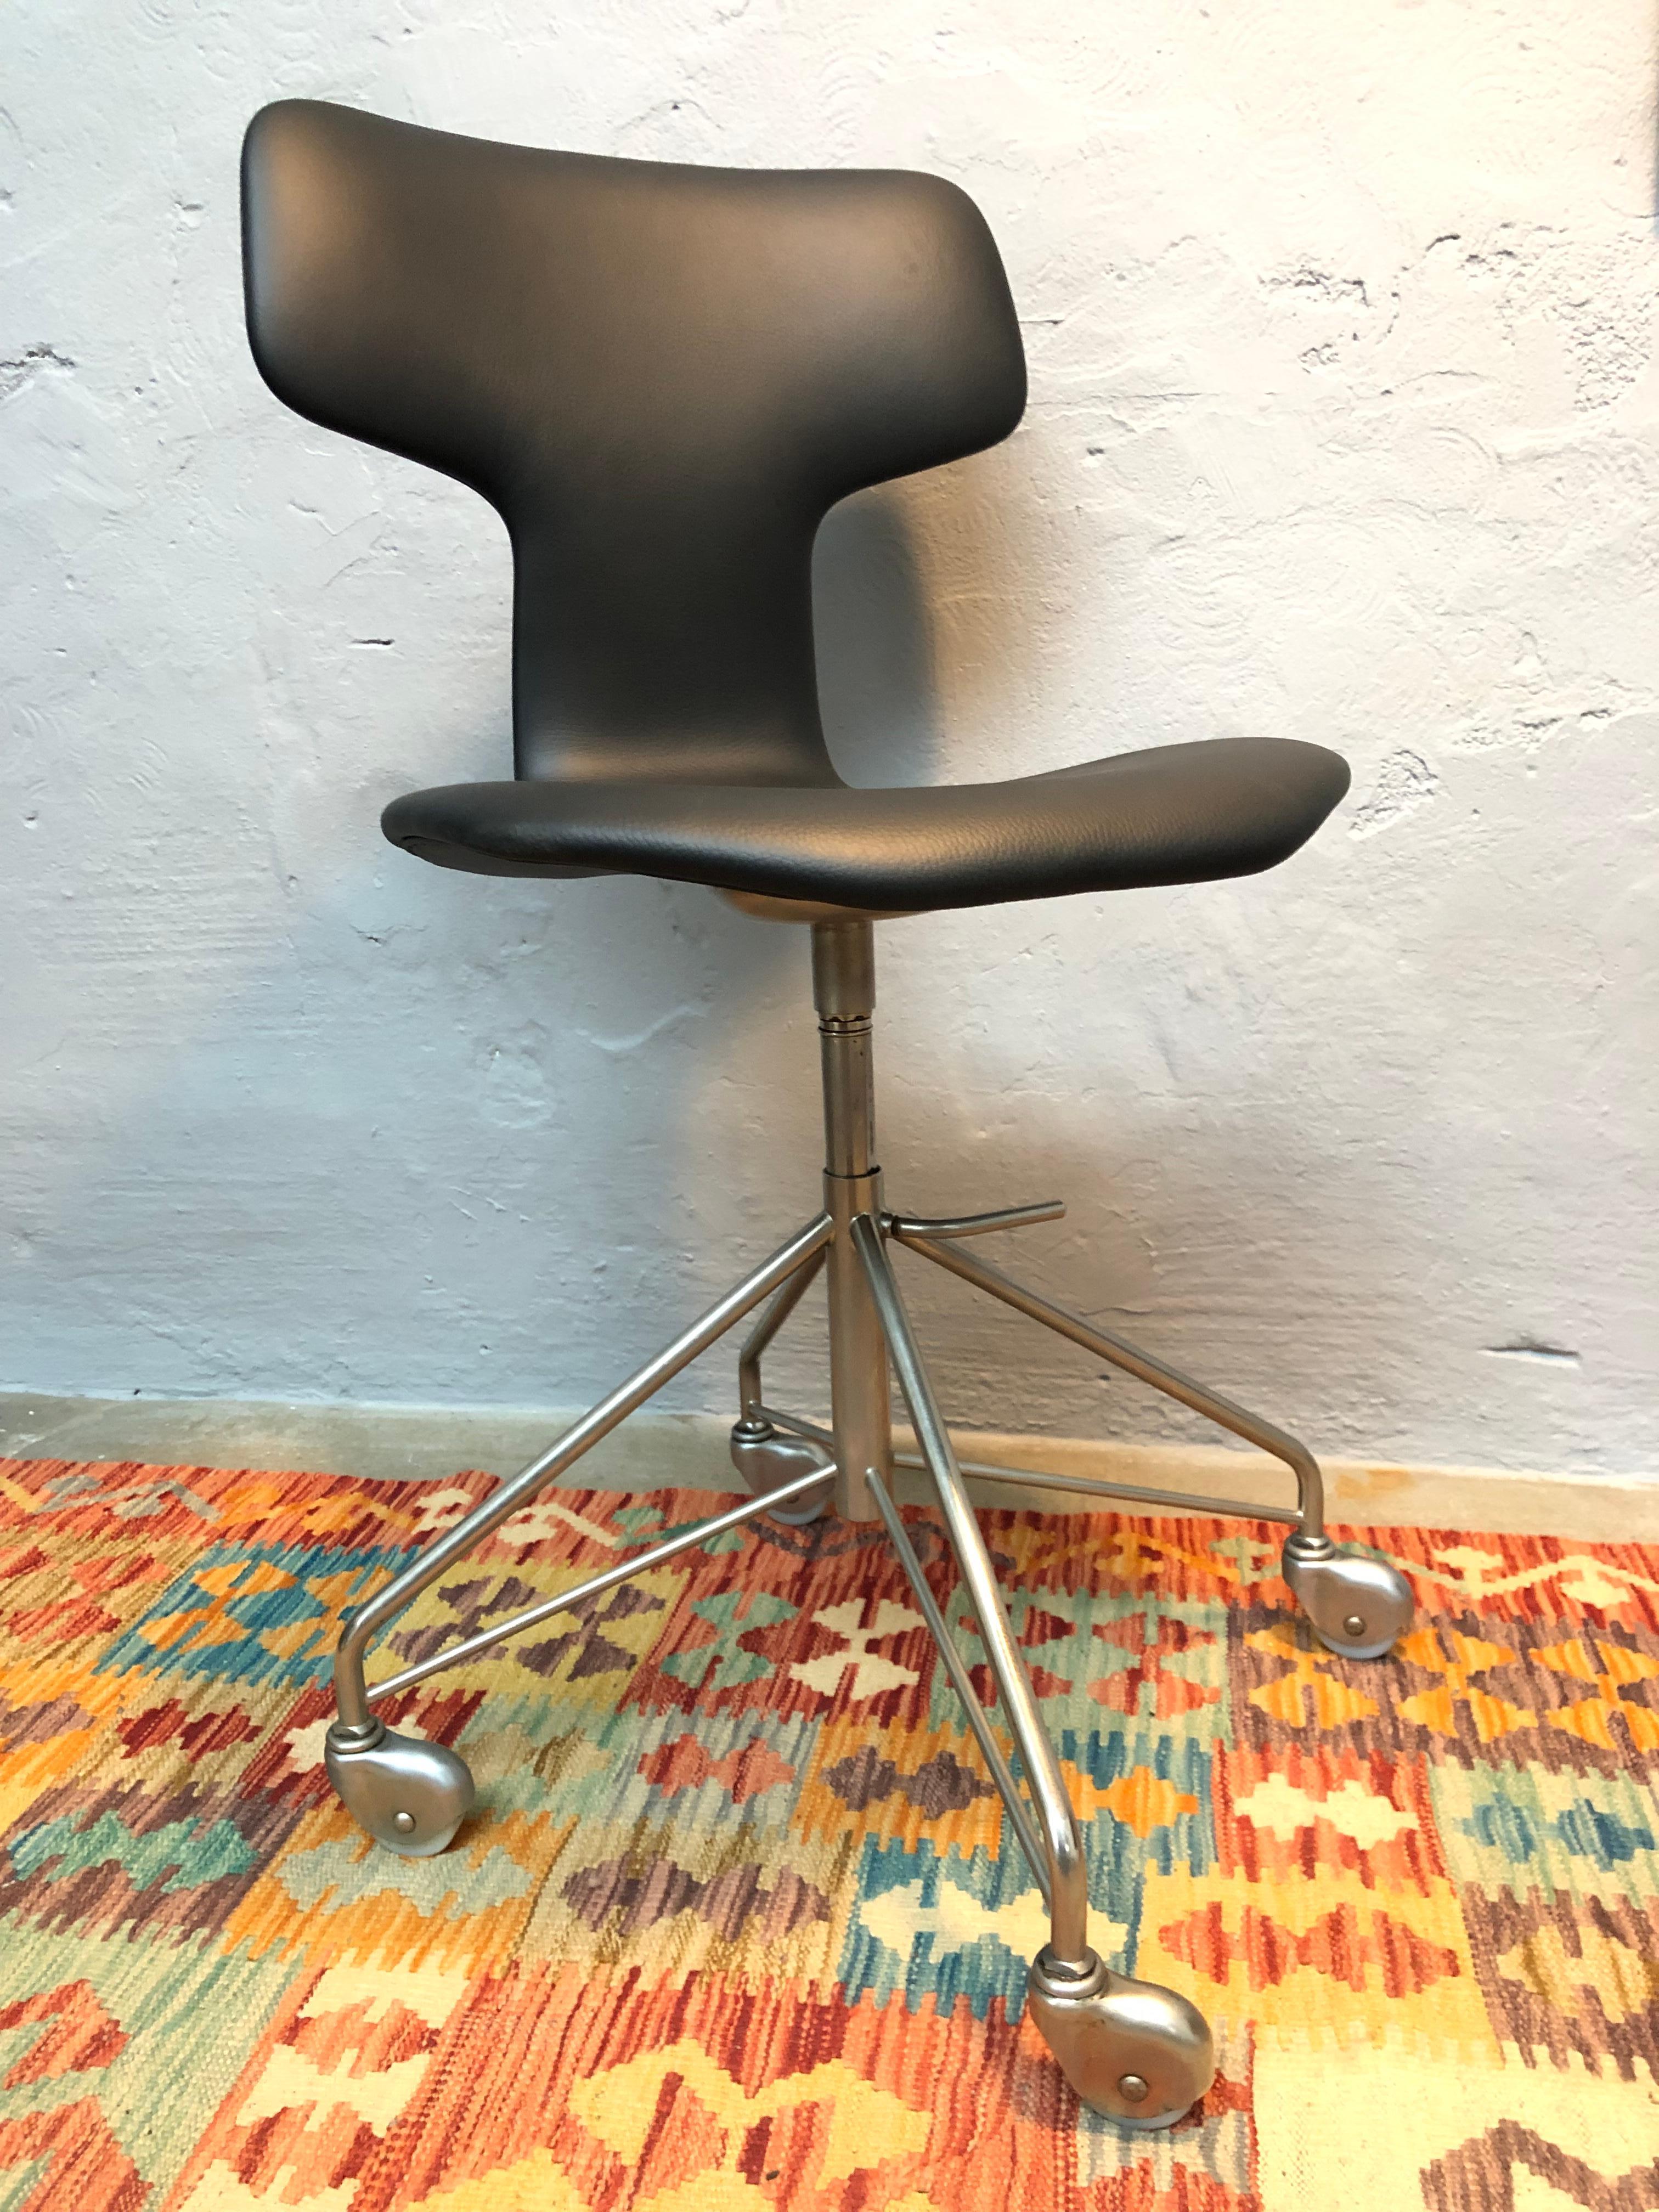 A vintage 3113 series one hammer office chair by Arne Jacobsen for Fritz Hansen of Denmark from the late 1950s. 
This chair has been completely refurbish. 
The wheels have been dismantled and missing ball bearings replaced and greased.